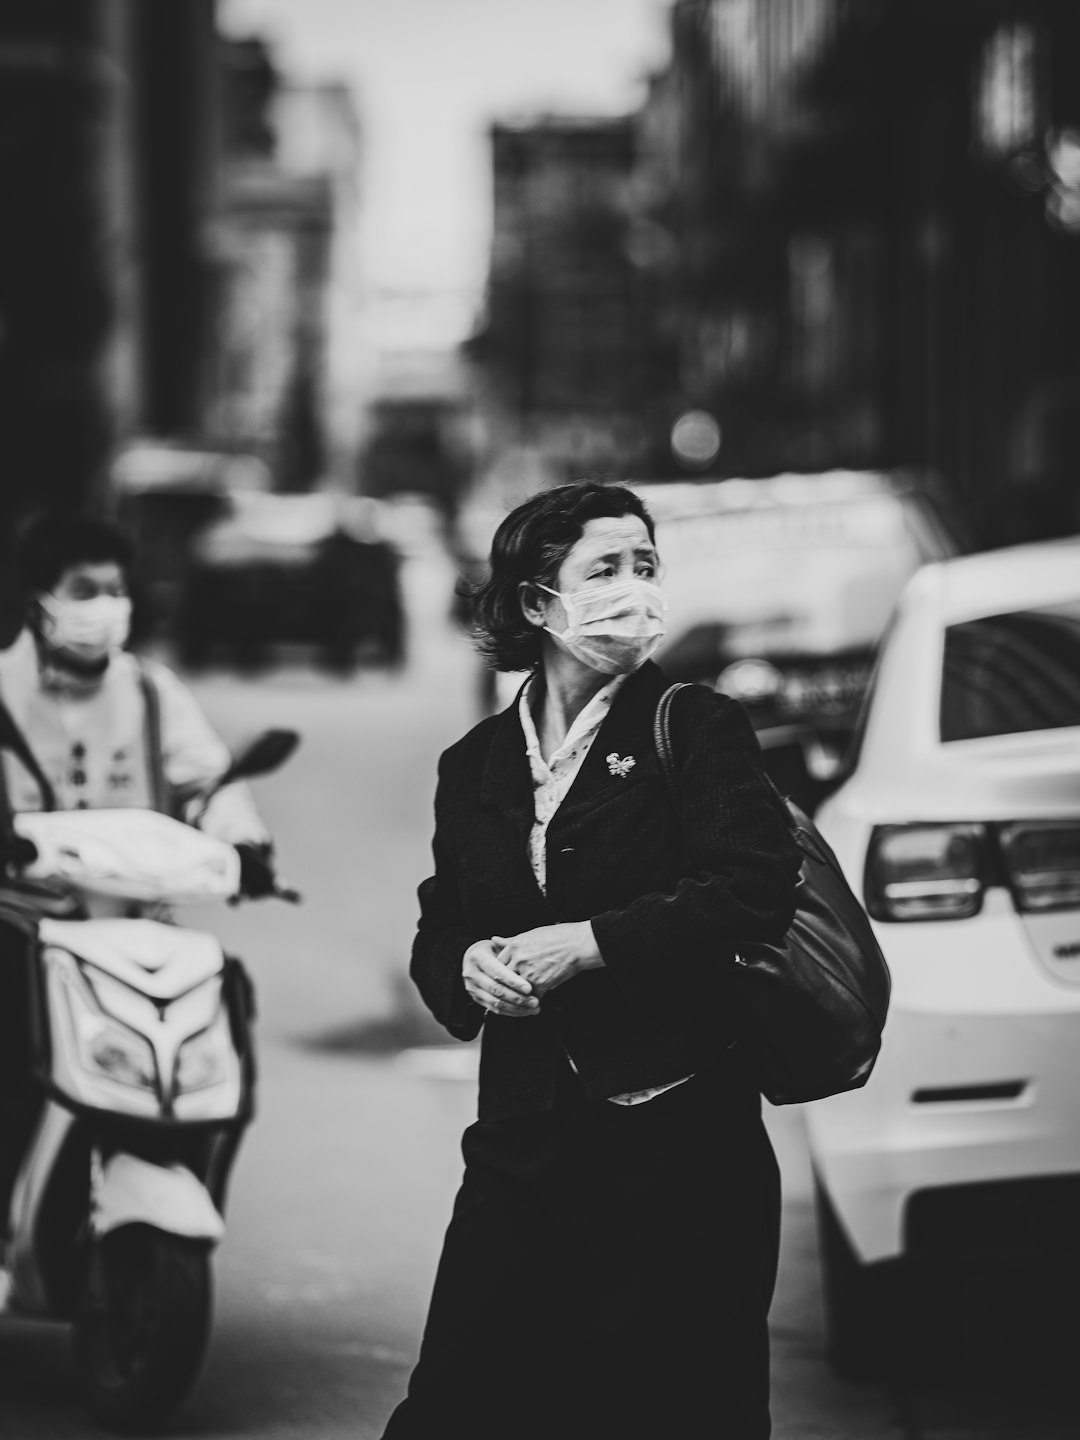 grayscale photo of woman in black coat and black sunglasses holding smartphone